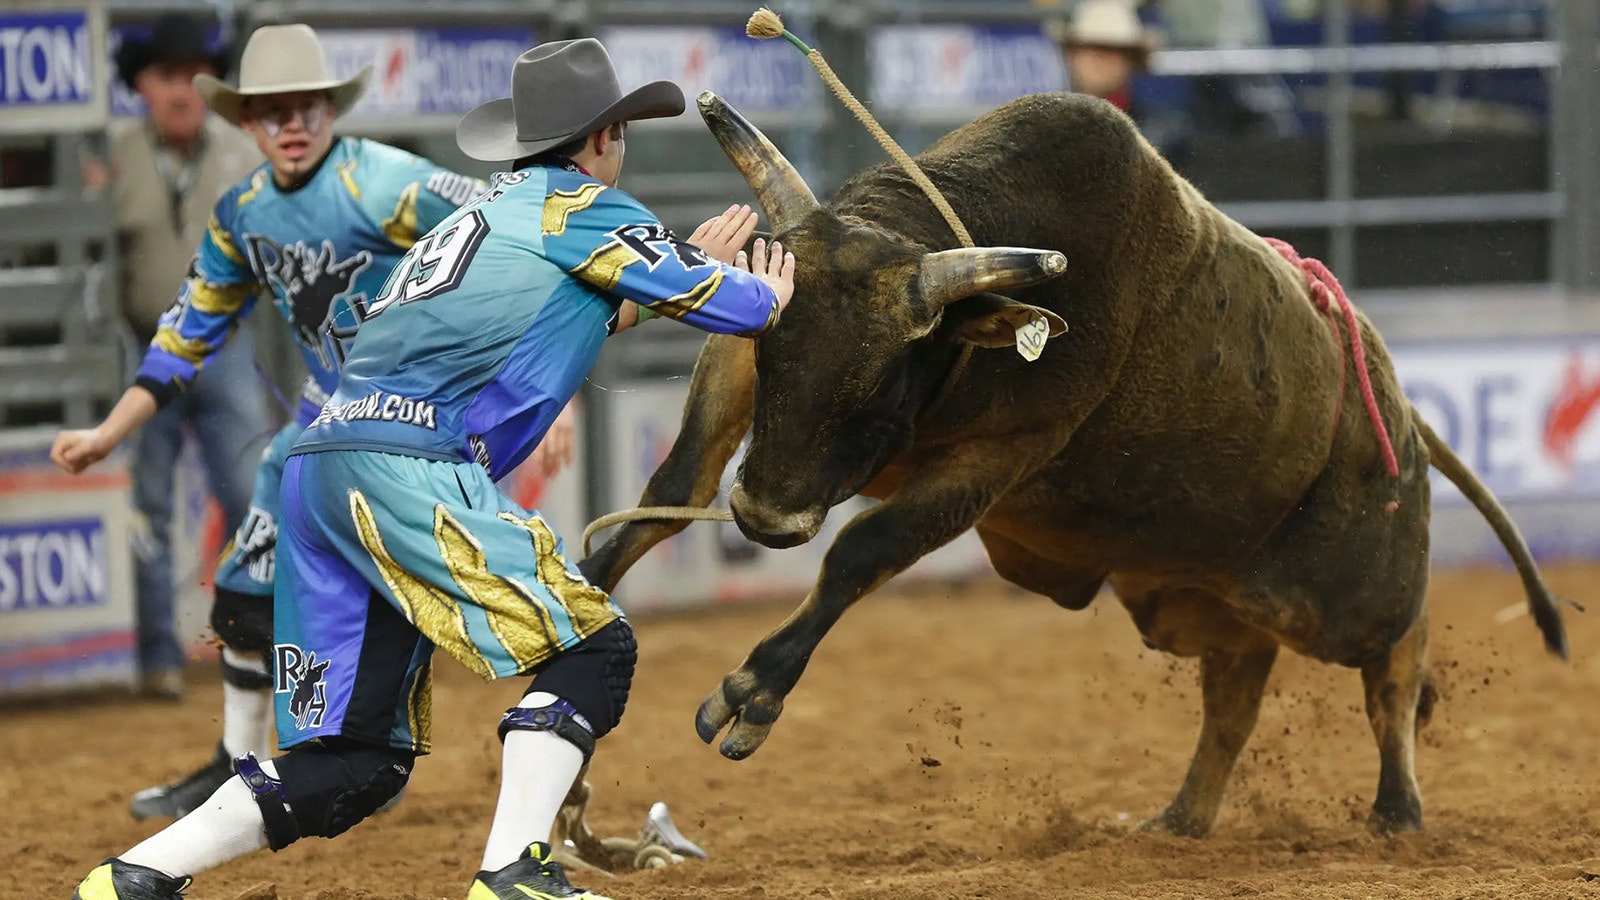 Bullfighter Dusty Tuckness tries to stop Hustle & Flow during the bull riding competition during the Houston Livestock Show and Rodeo at NRG Park on March 7, 2015, in Houston.